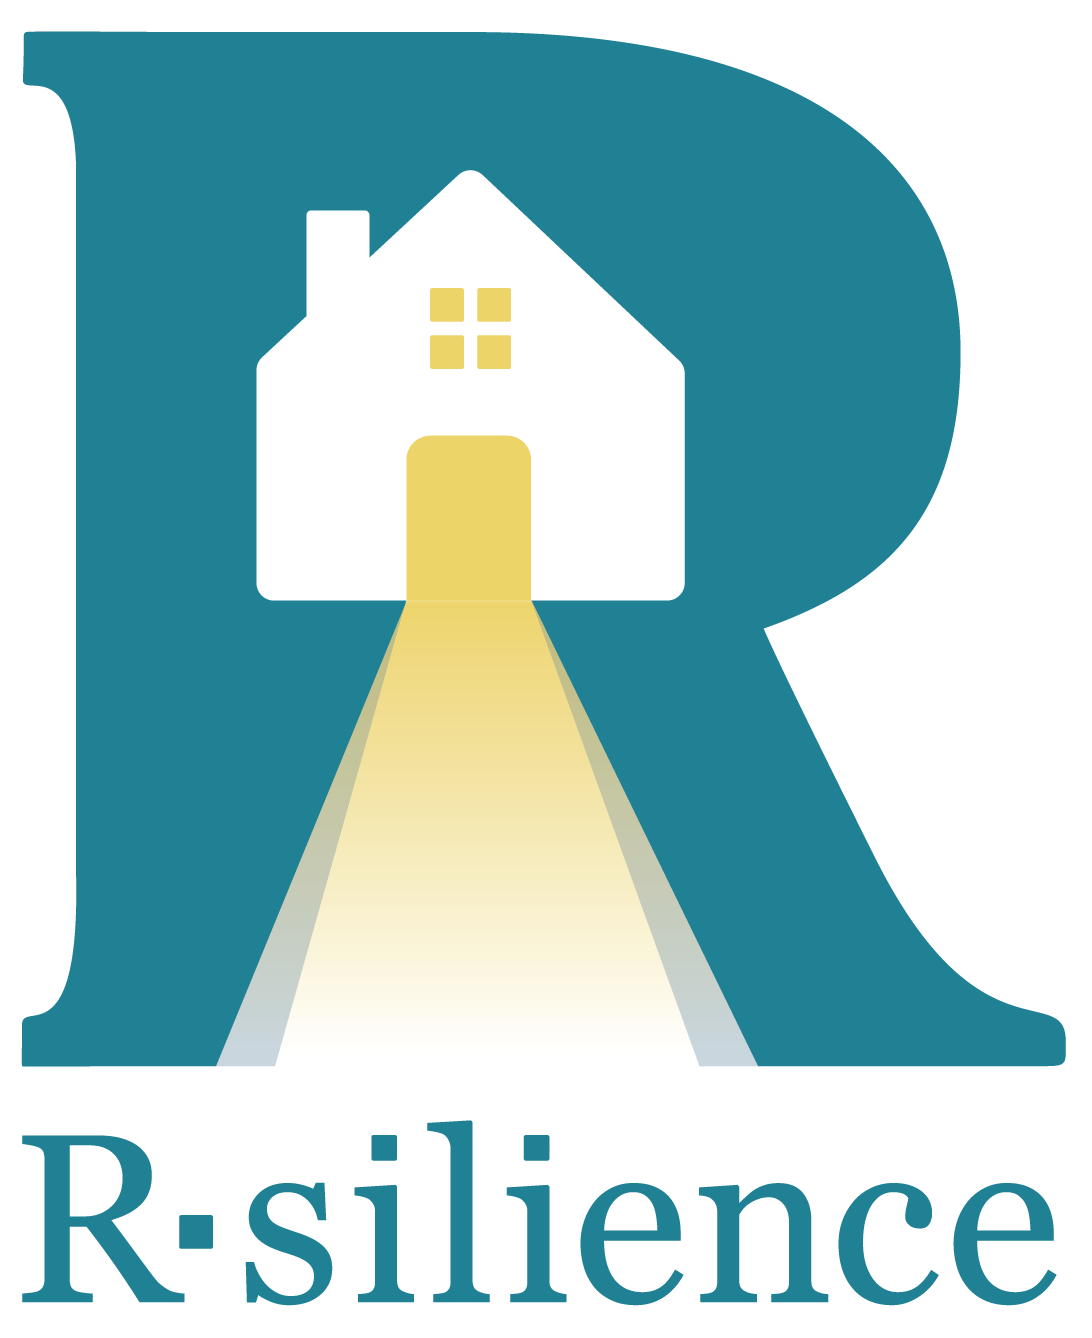 R-silience to Find Recovery Housing